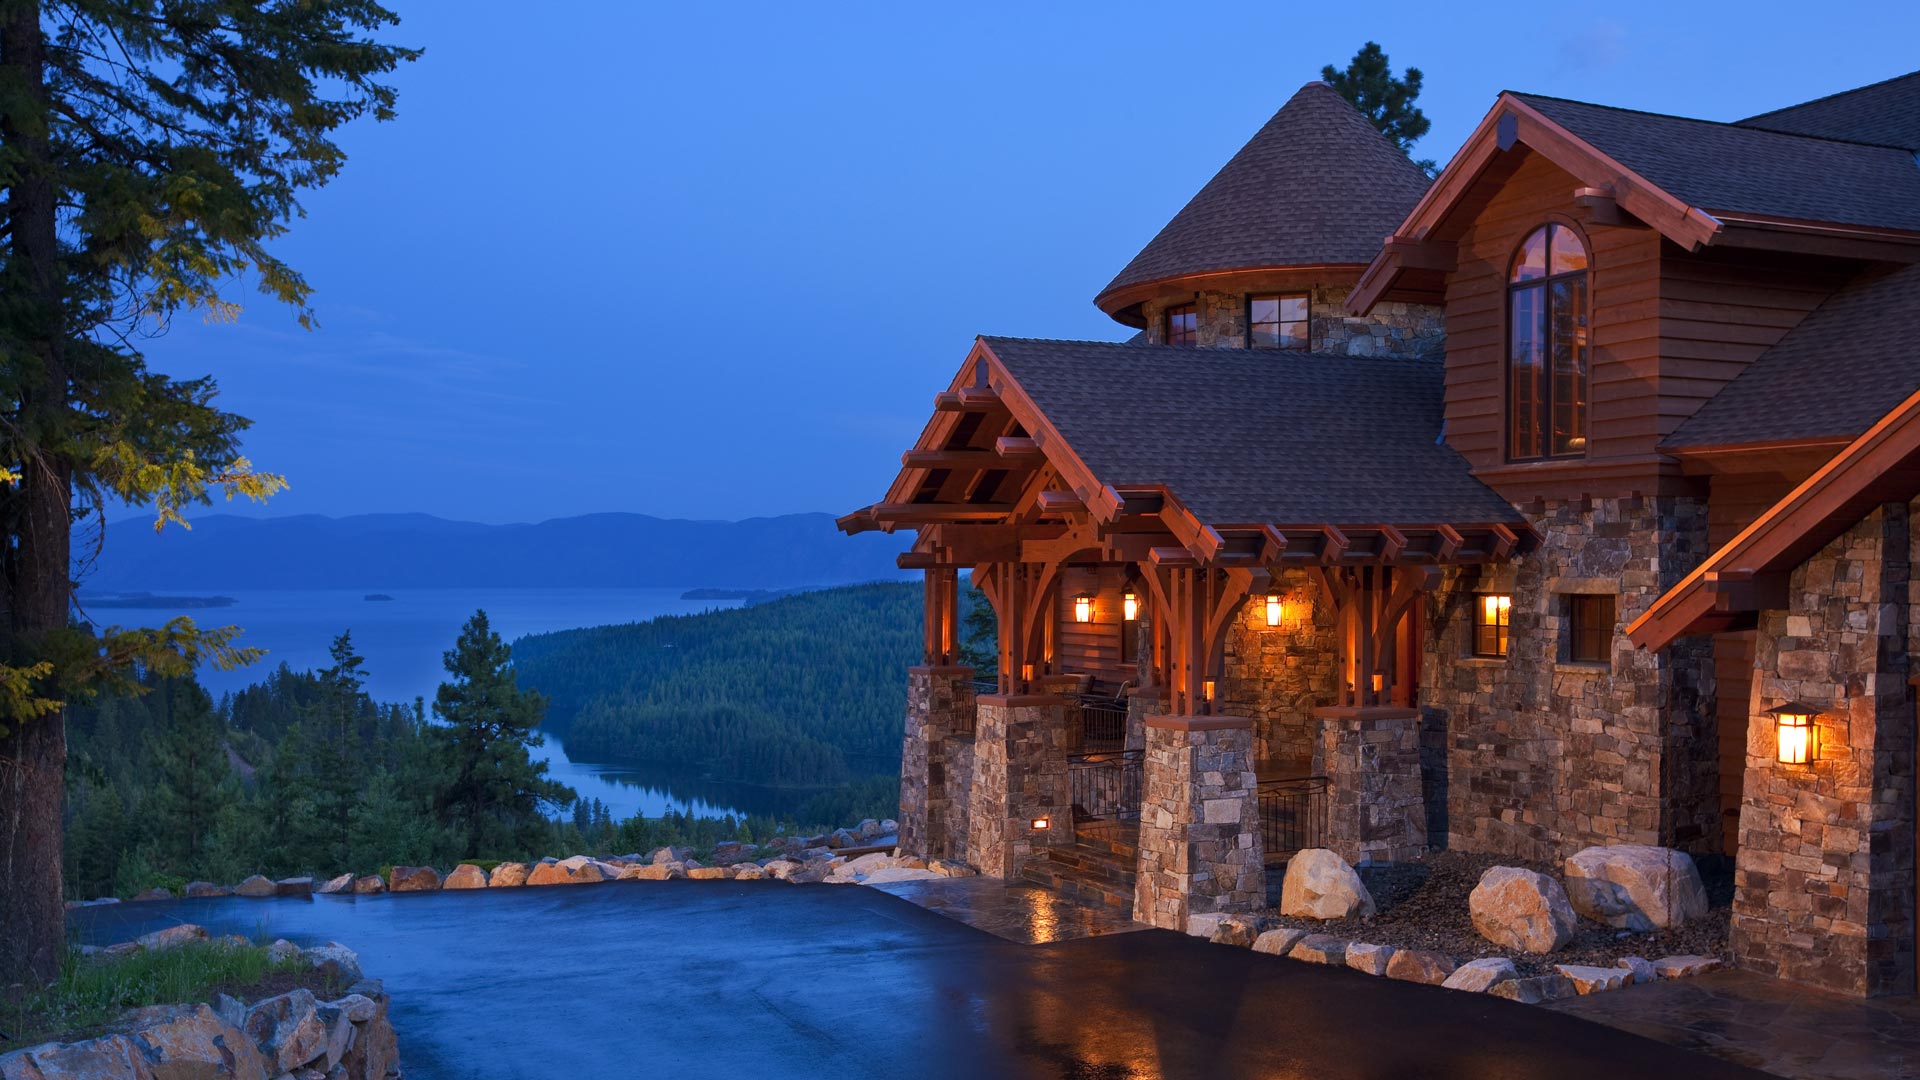 Nature in Adult-Friendly Treehouses at Mountain Resort